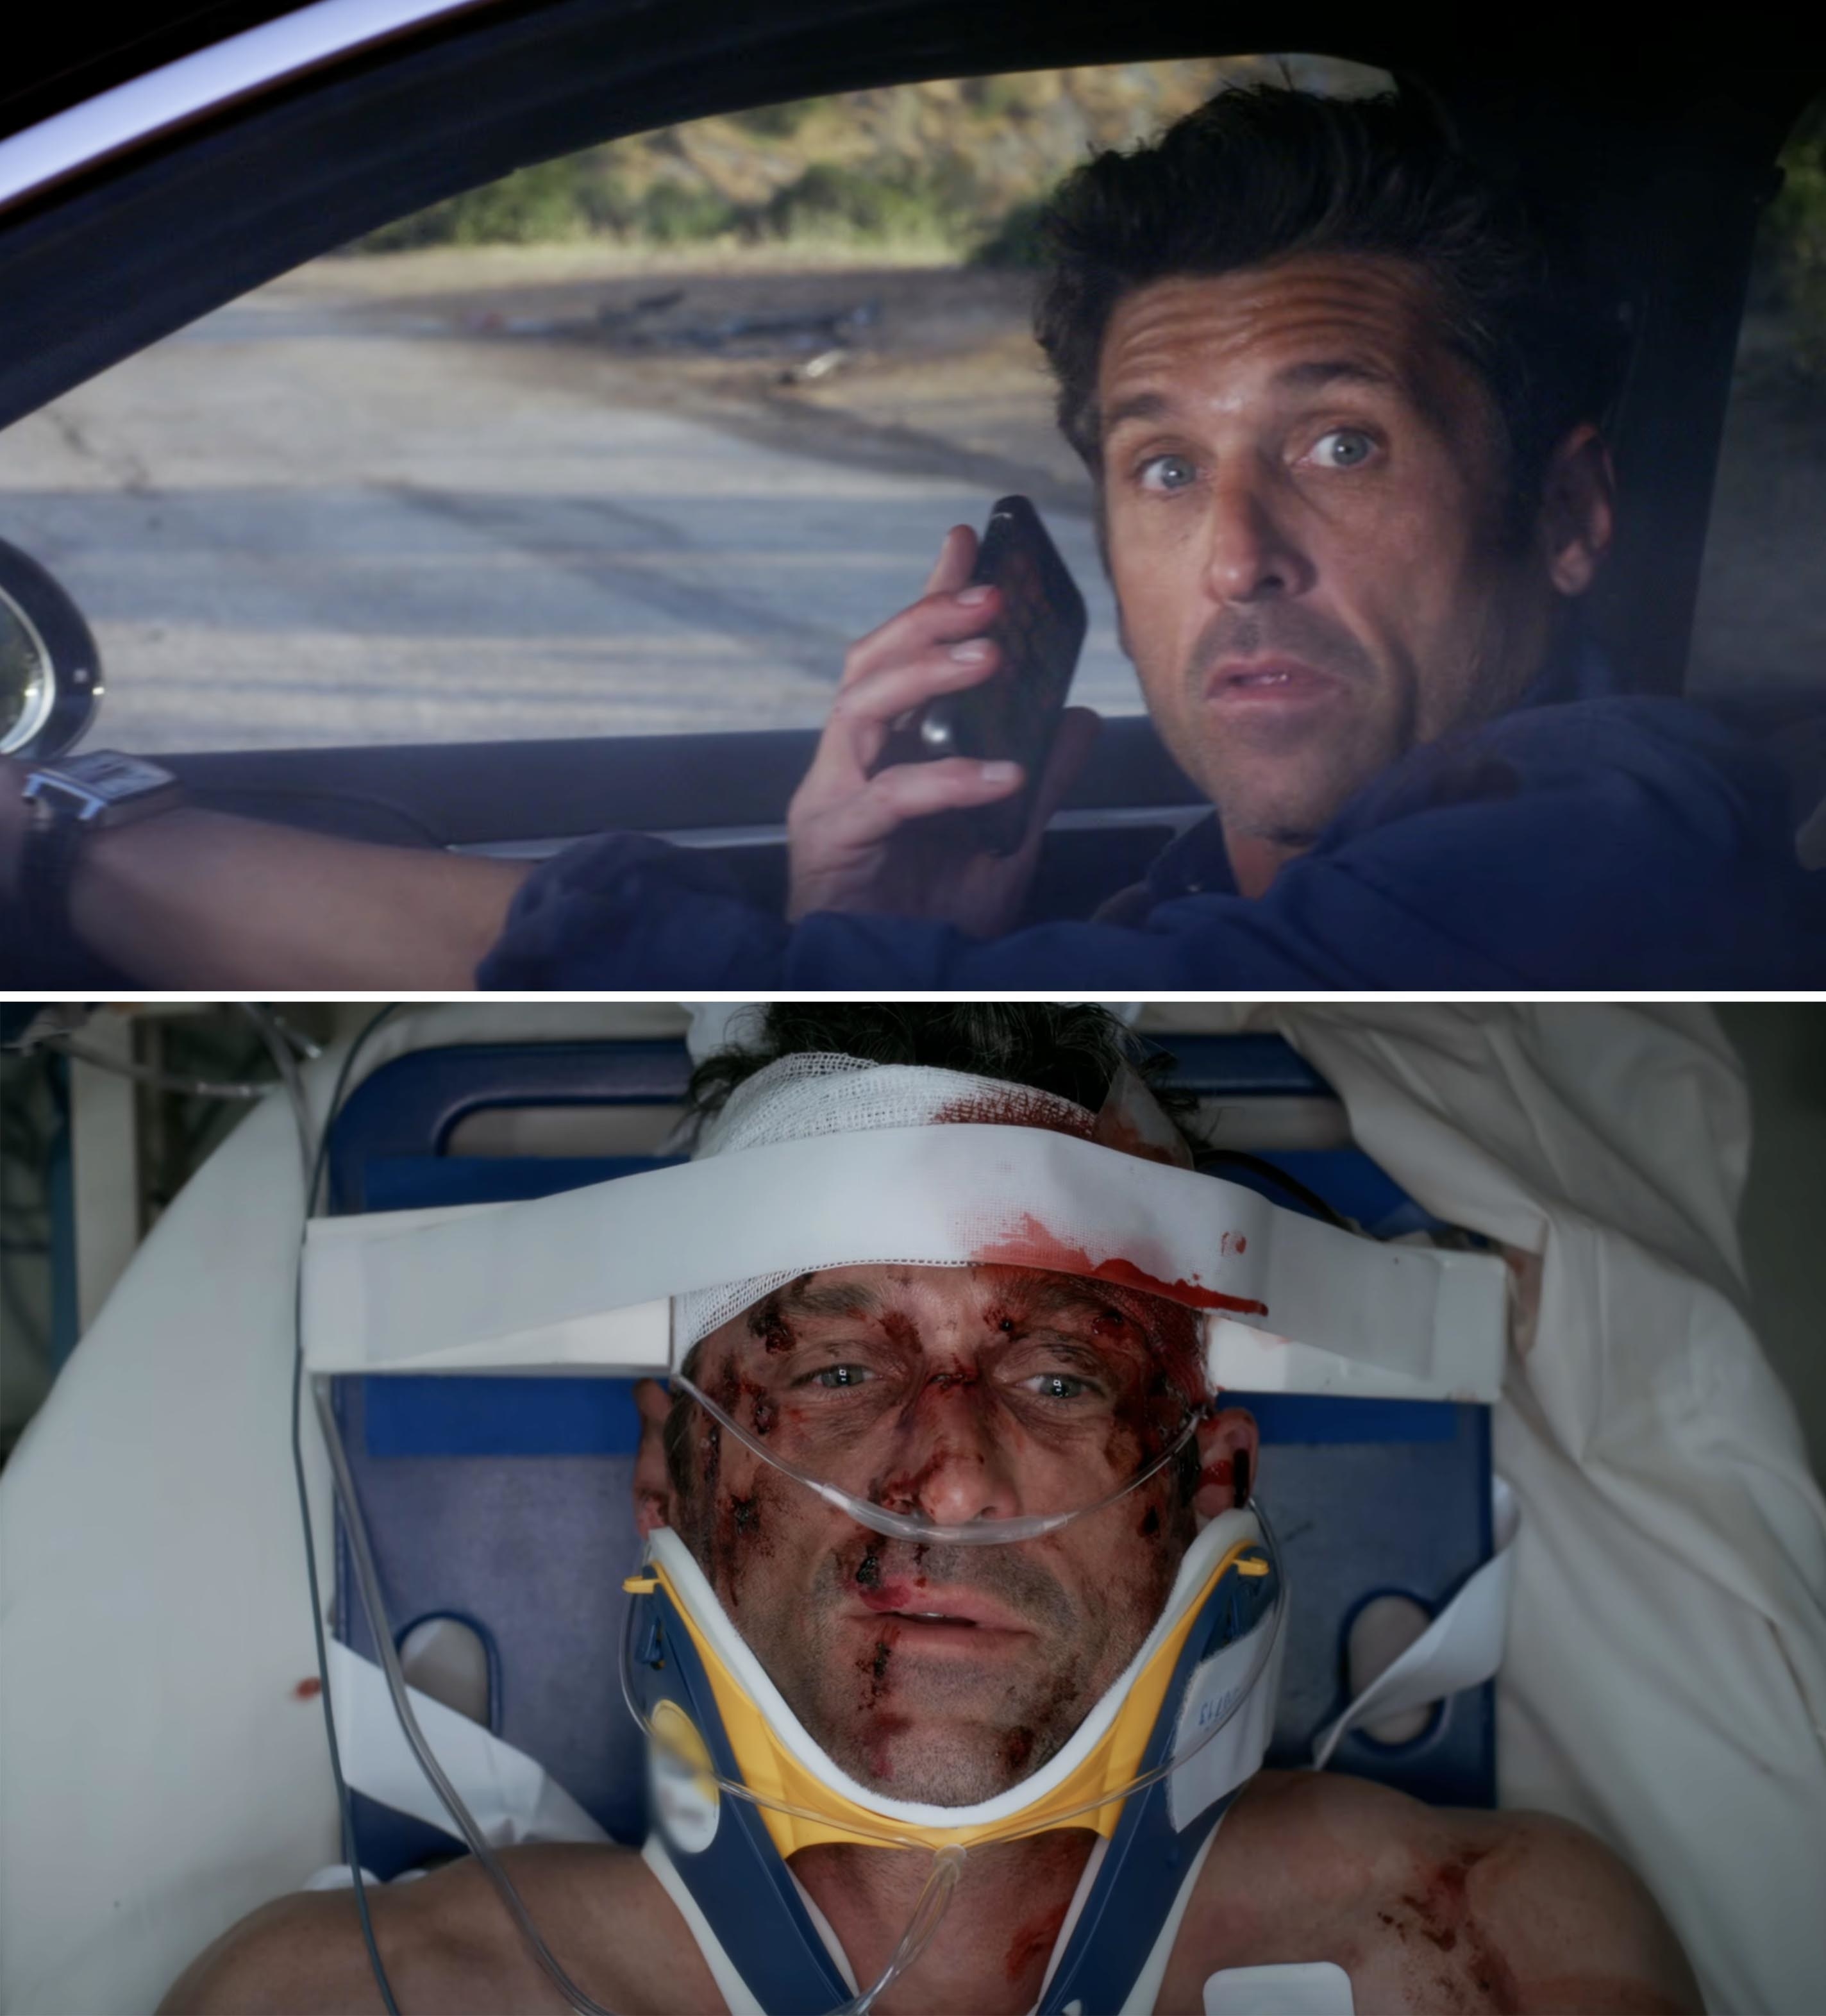 his character on the phone while driving and then in a stretcher with blood on his face